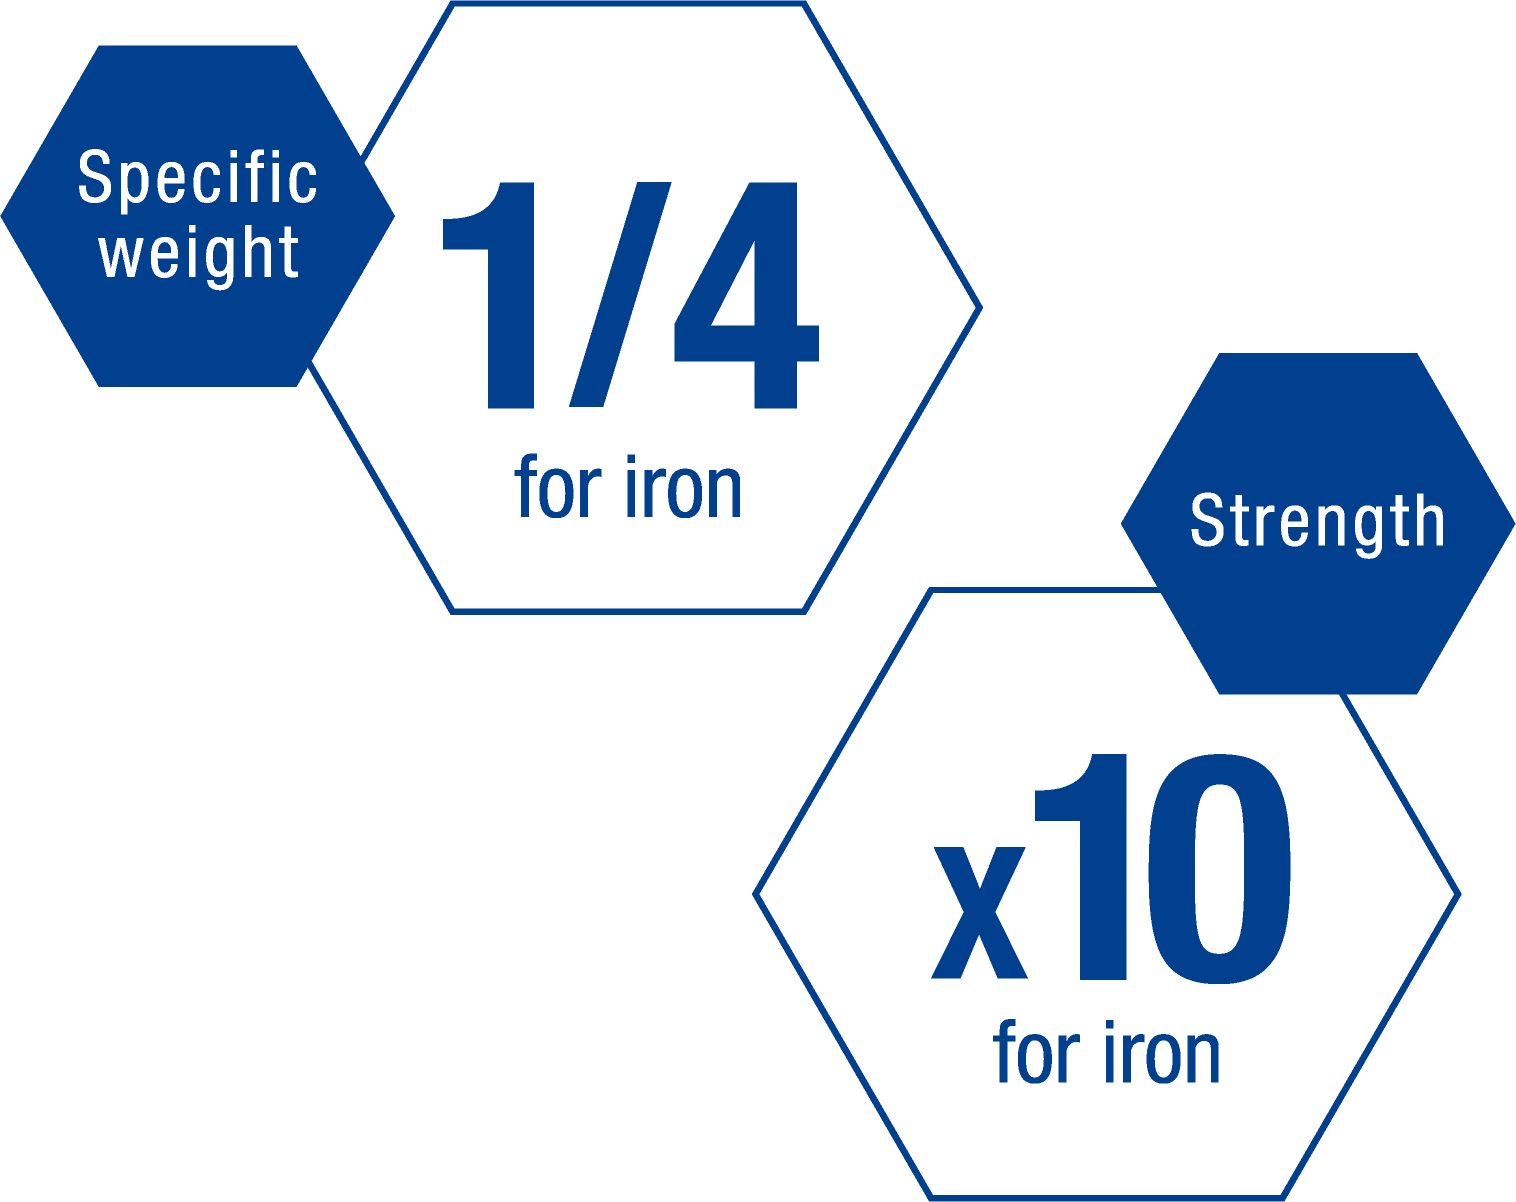 Specific weight 1/4 for iron, Strength x10 for iron